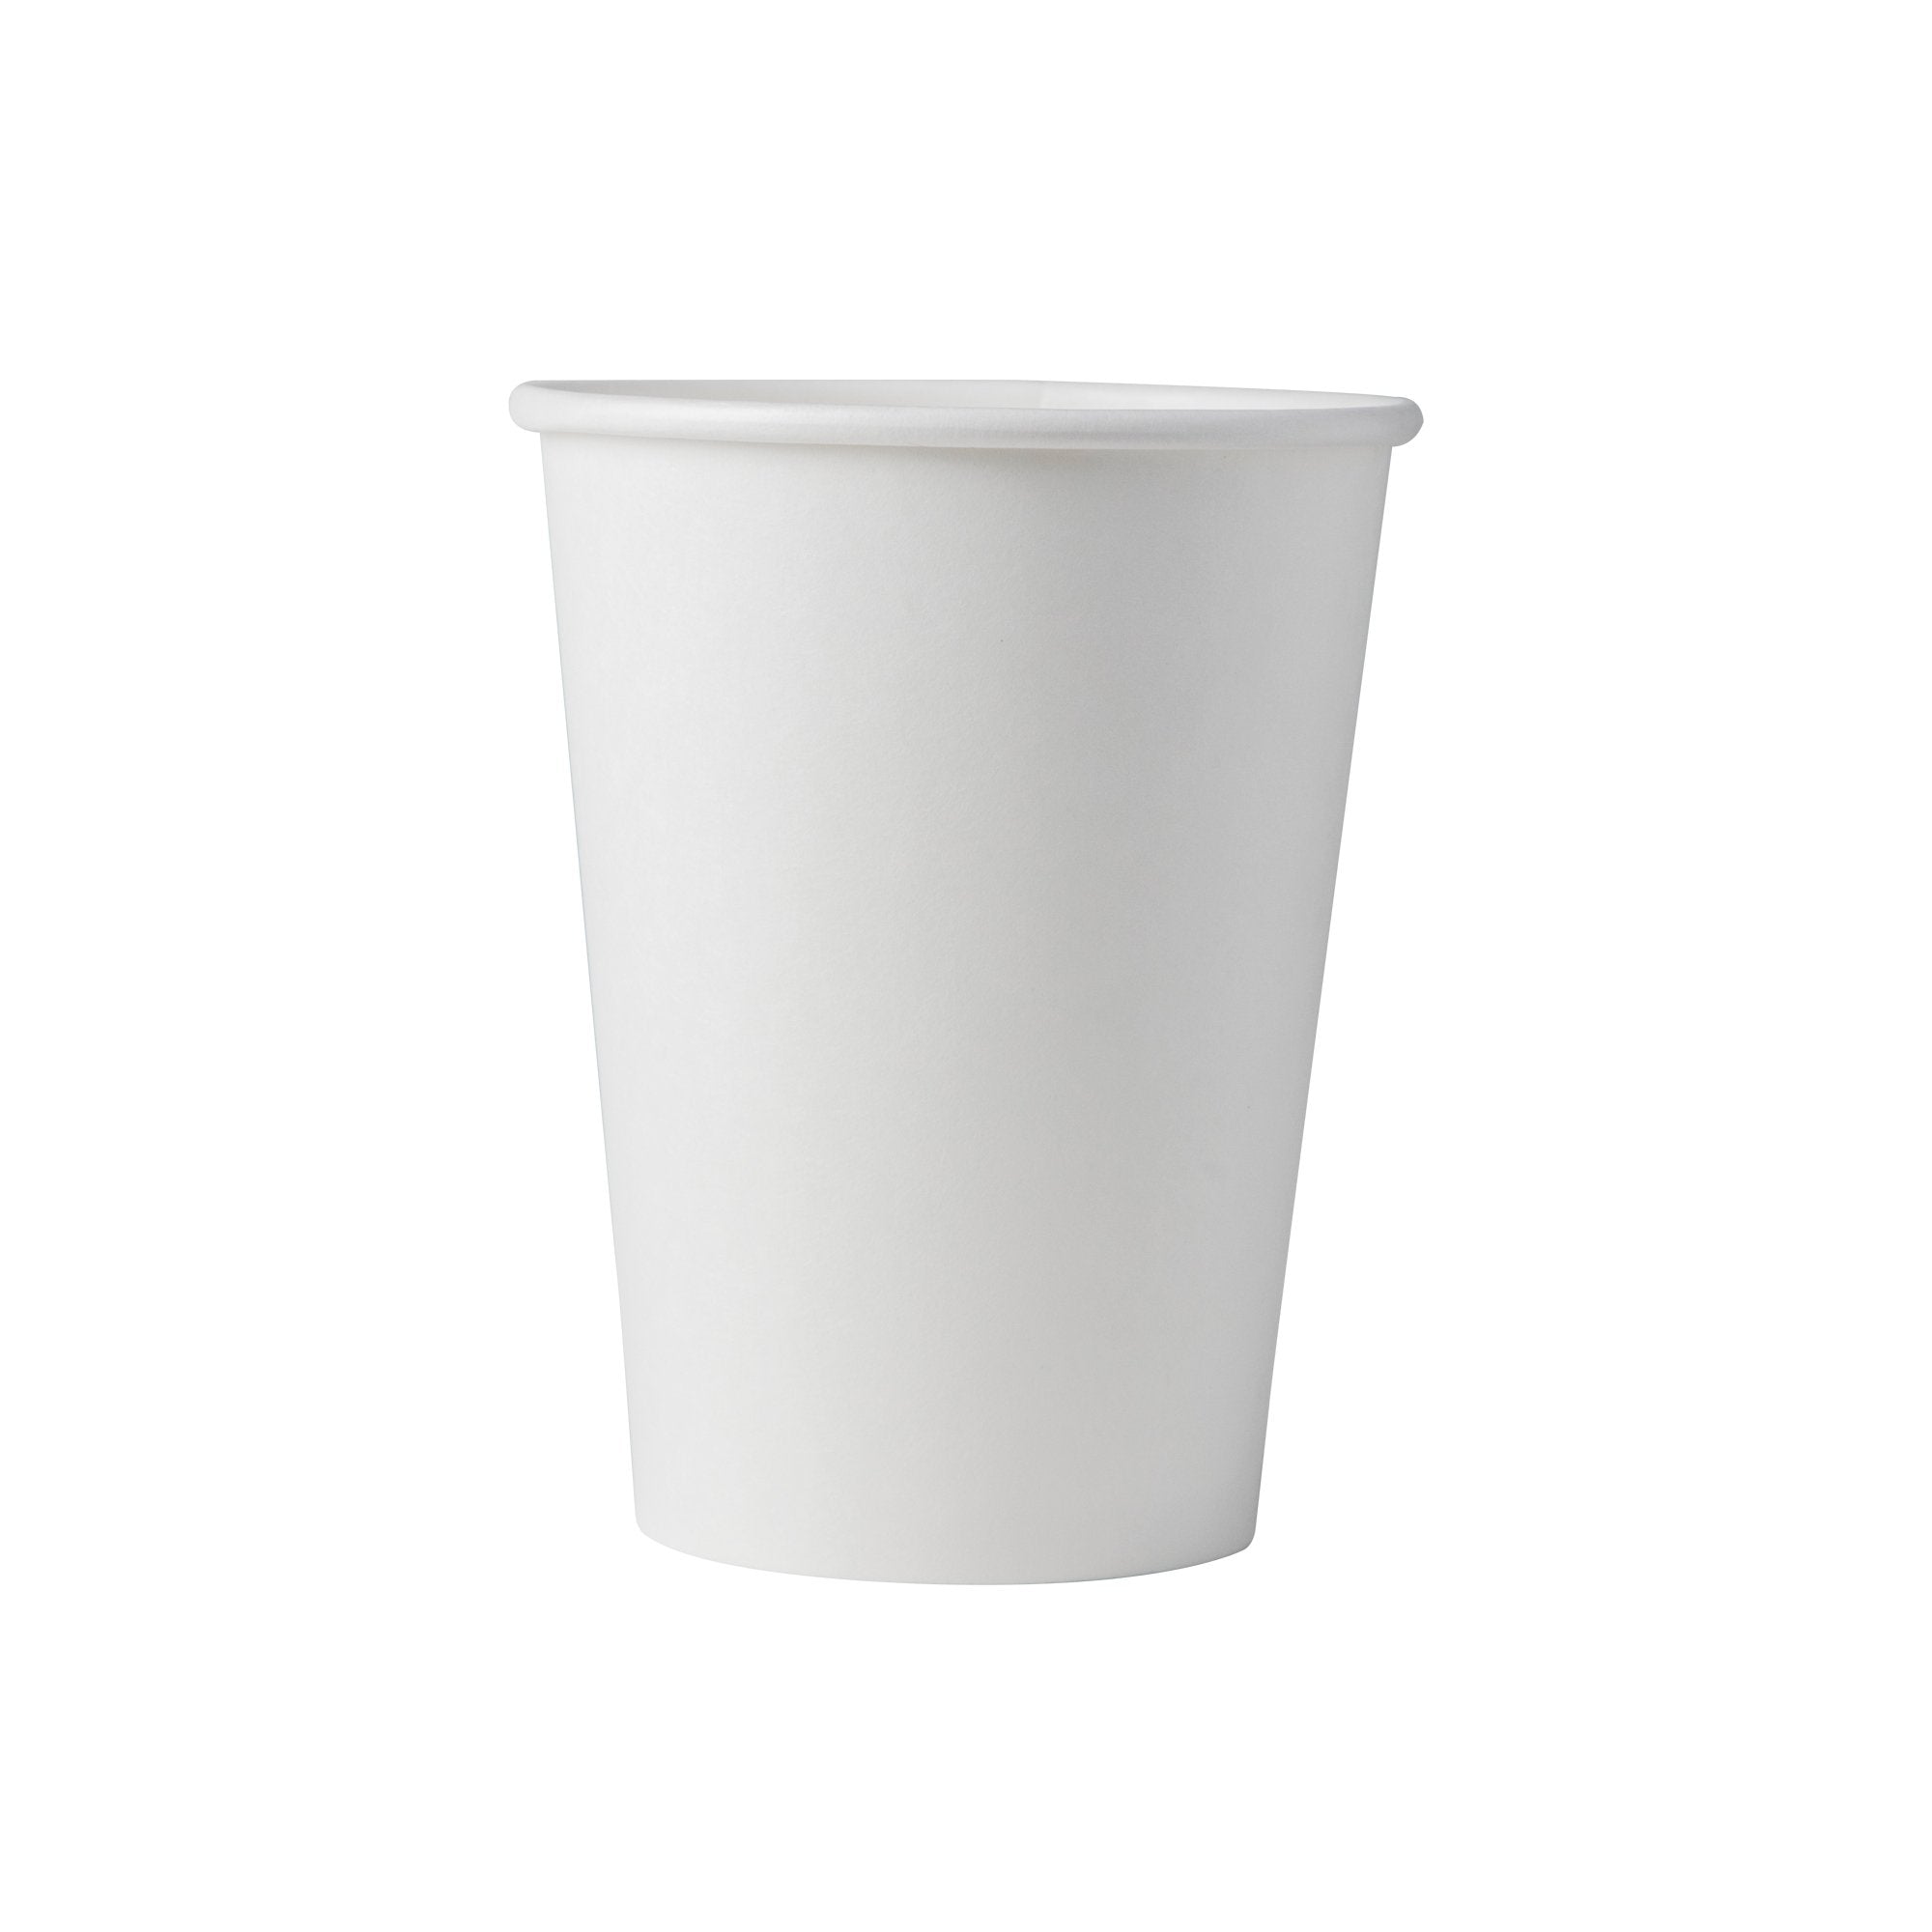 8 Oz. / 12 Oz. Disposable White Paper Soup Containers With Plastic Lids 